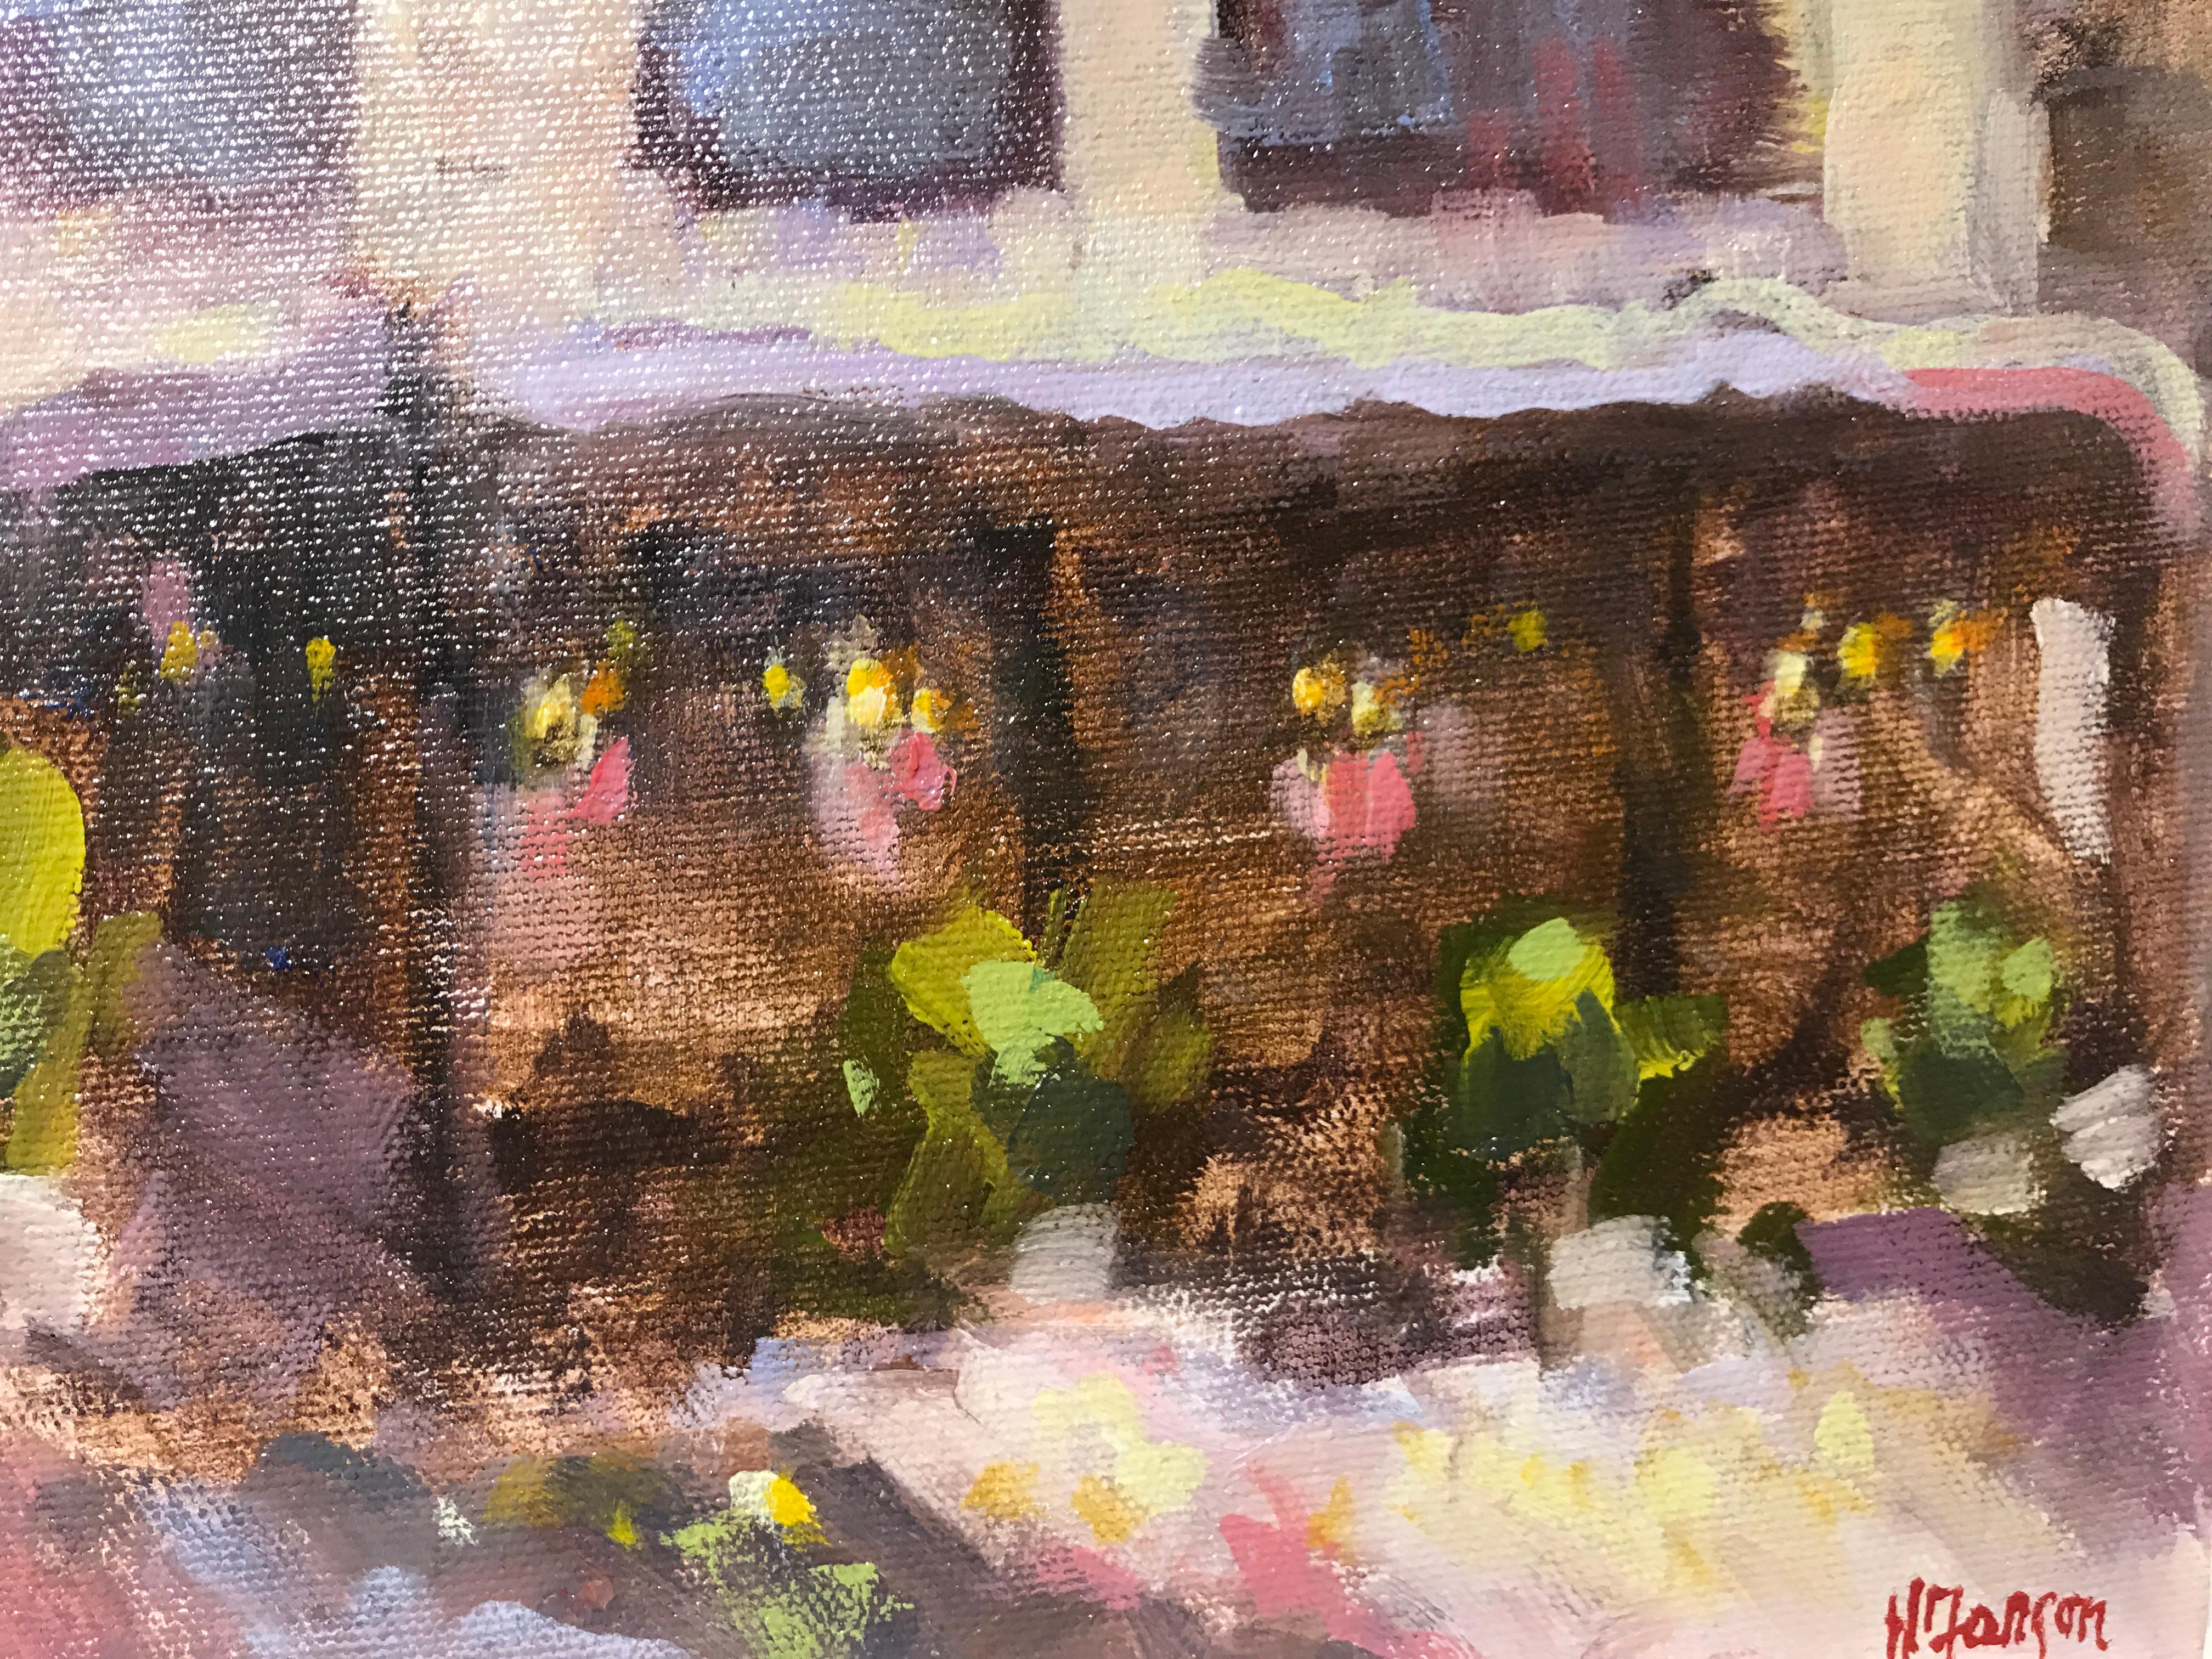 Lights in the Cafe by Helen Farson, Framed Impressionist Oil on Linen Painting 4